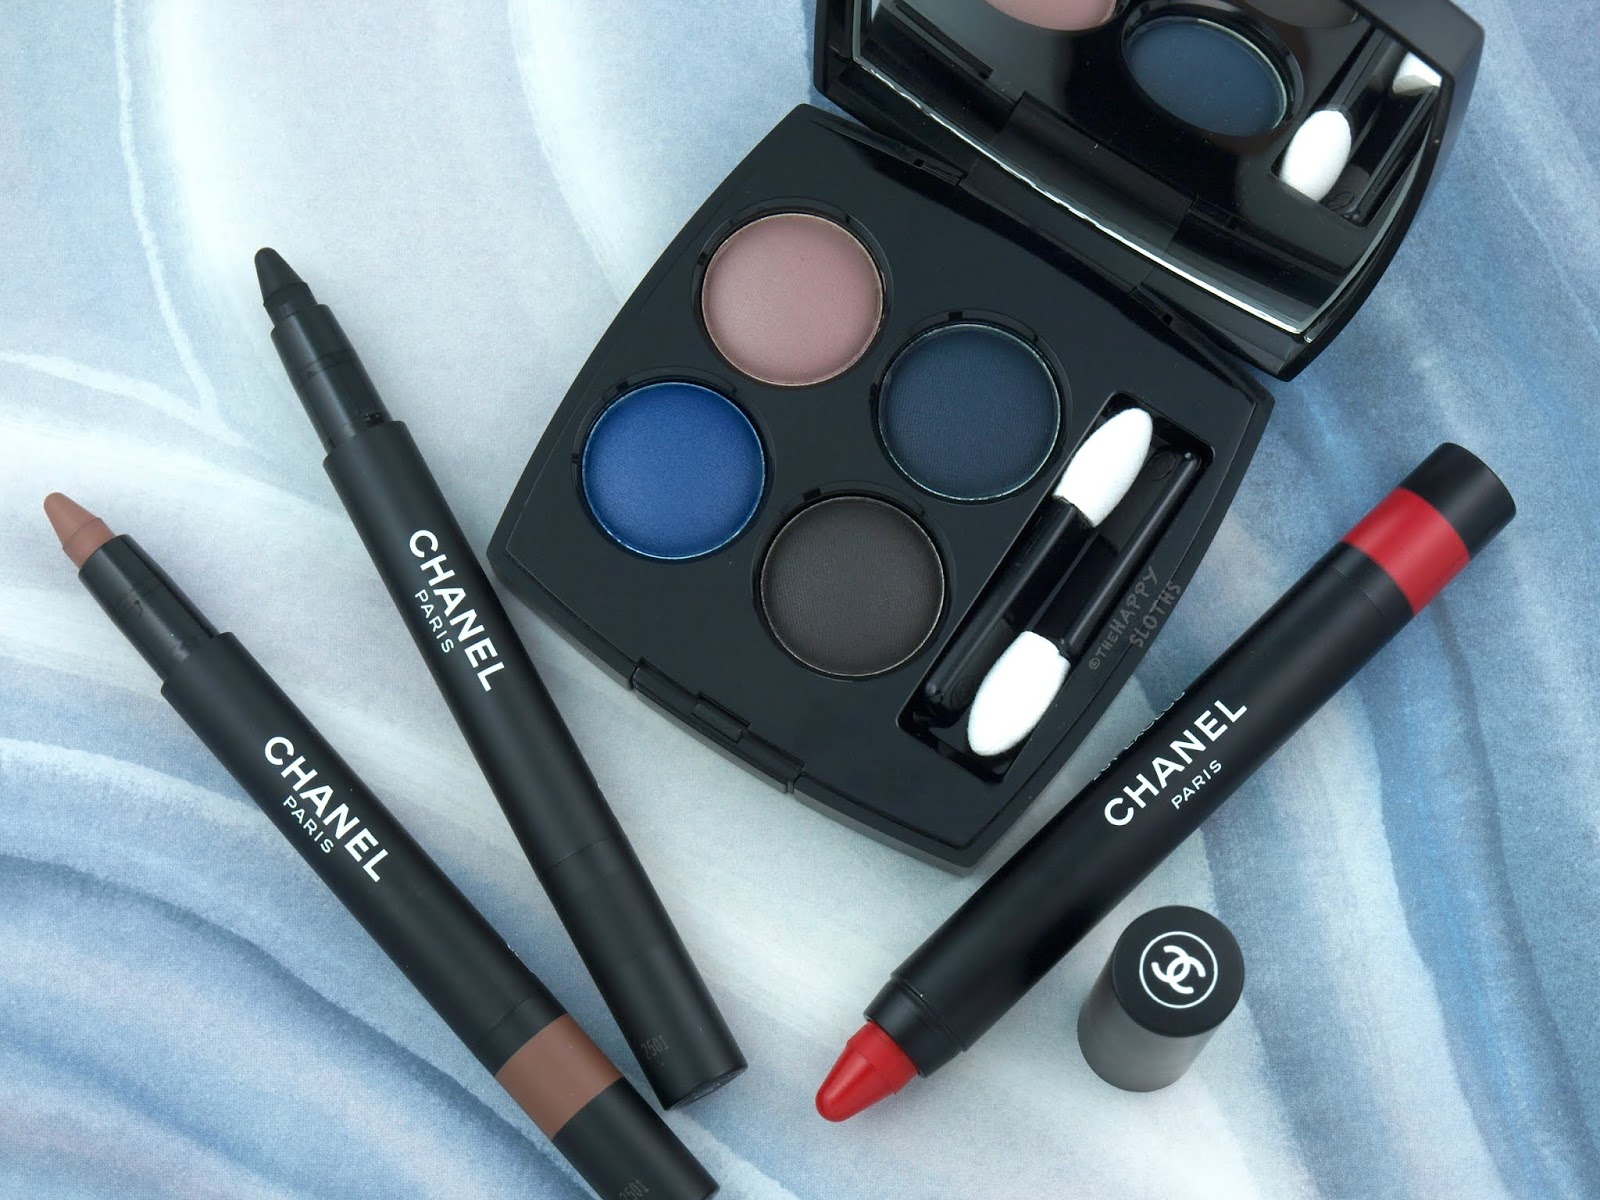 Chanel | Fall & Winter 2018 Apotheosis, Le Mat de Chanel Collection: Review and Swatches